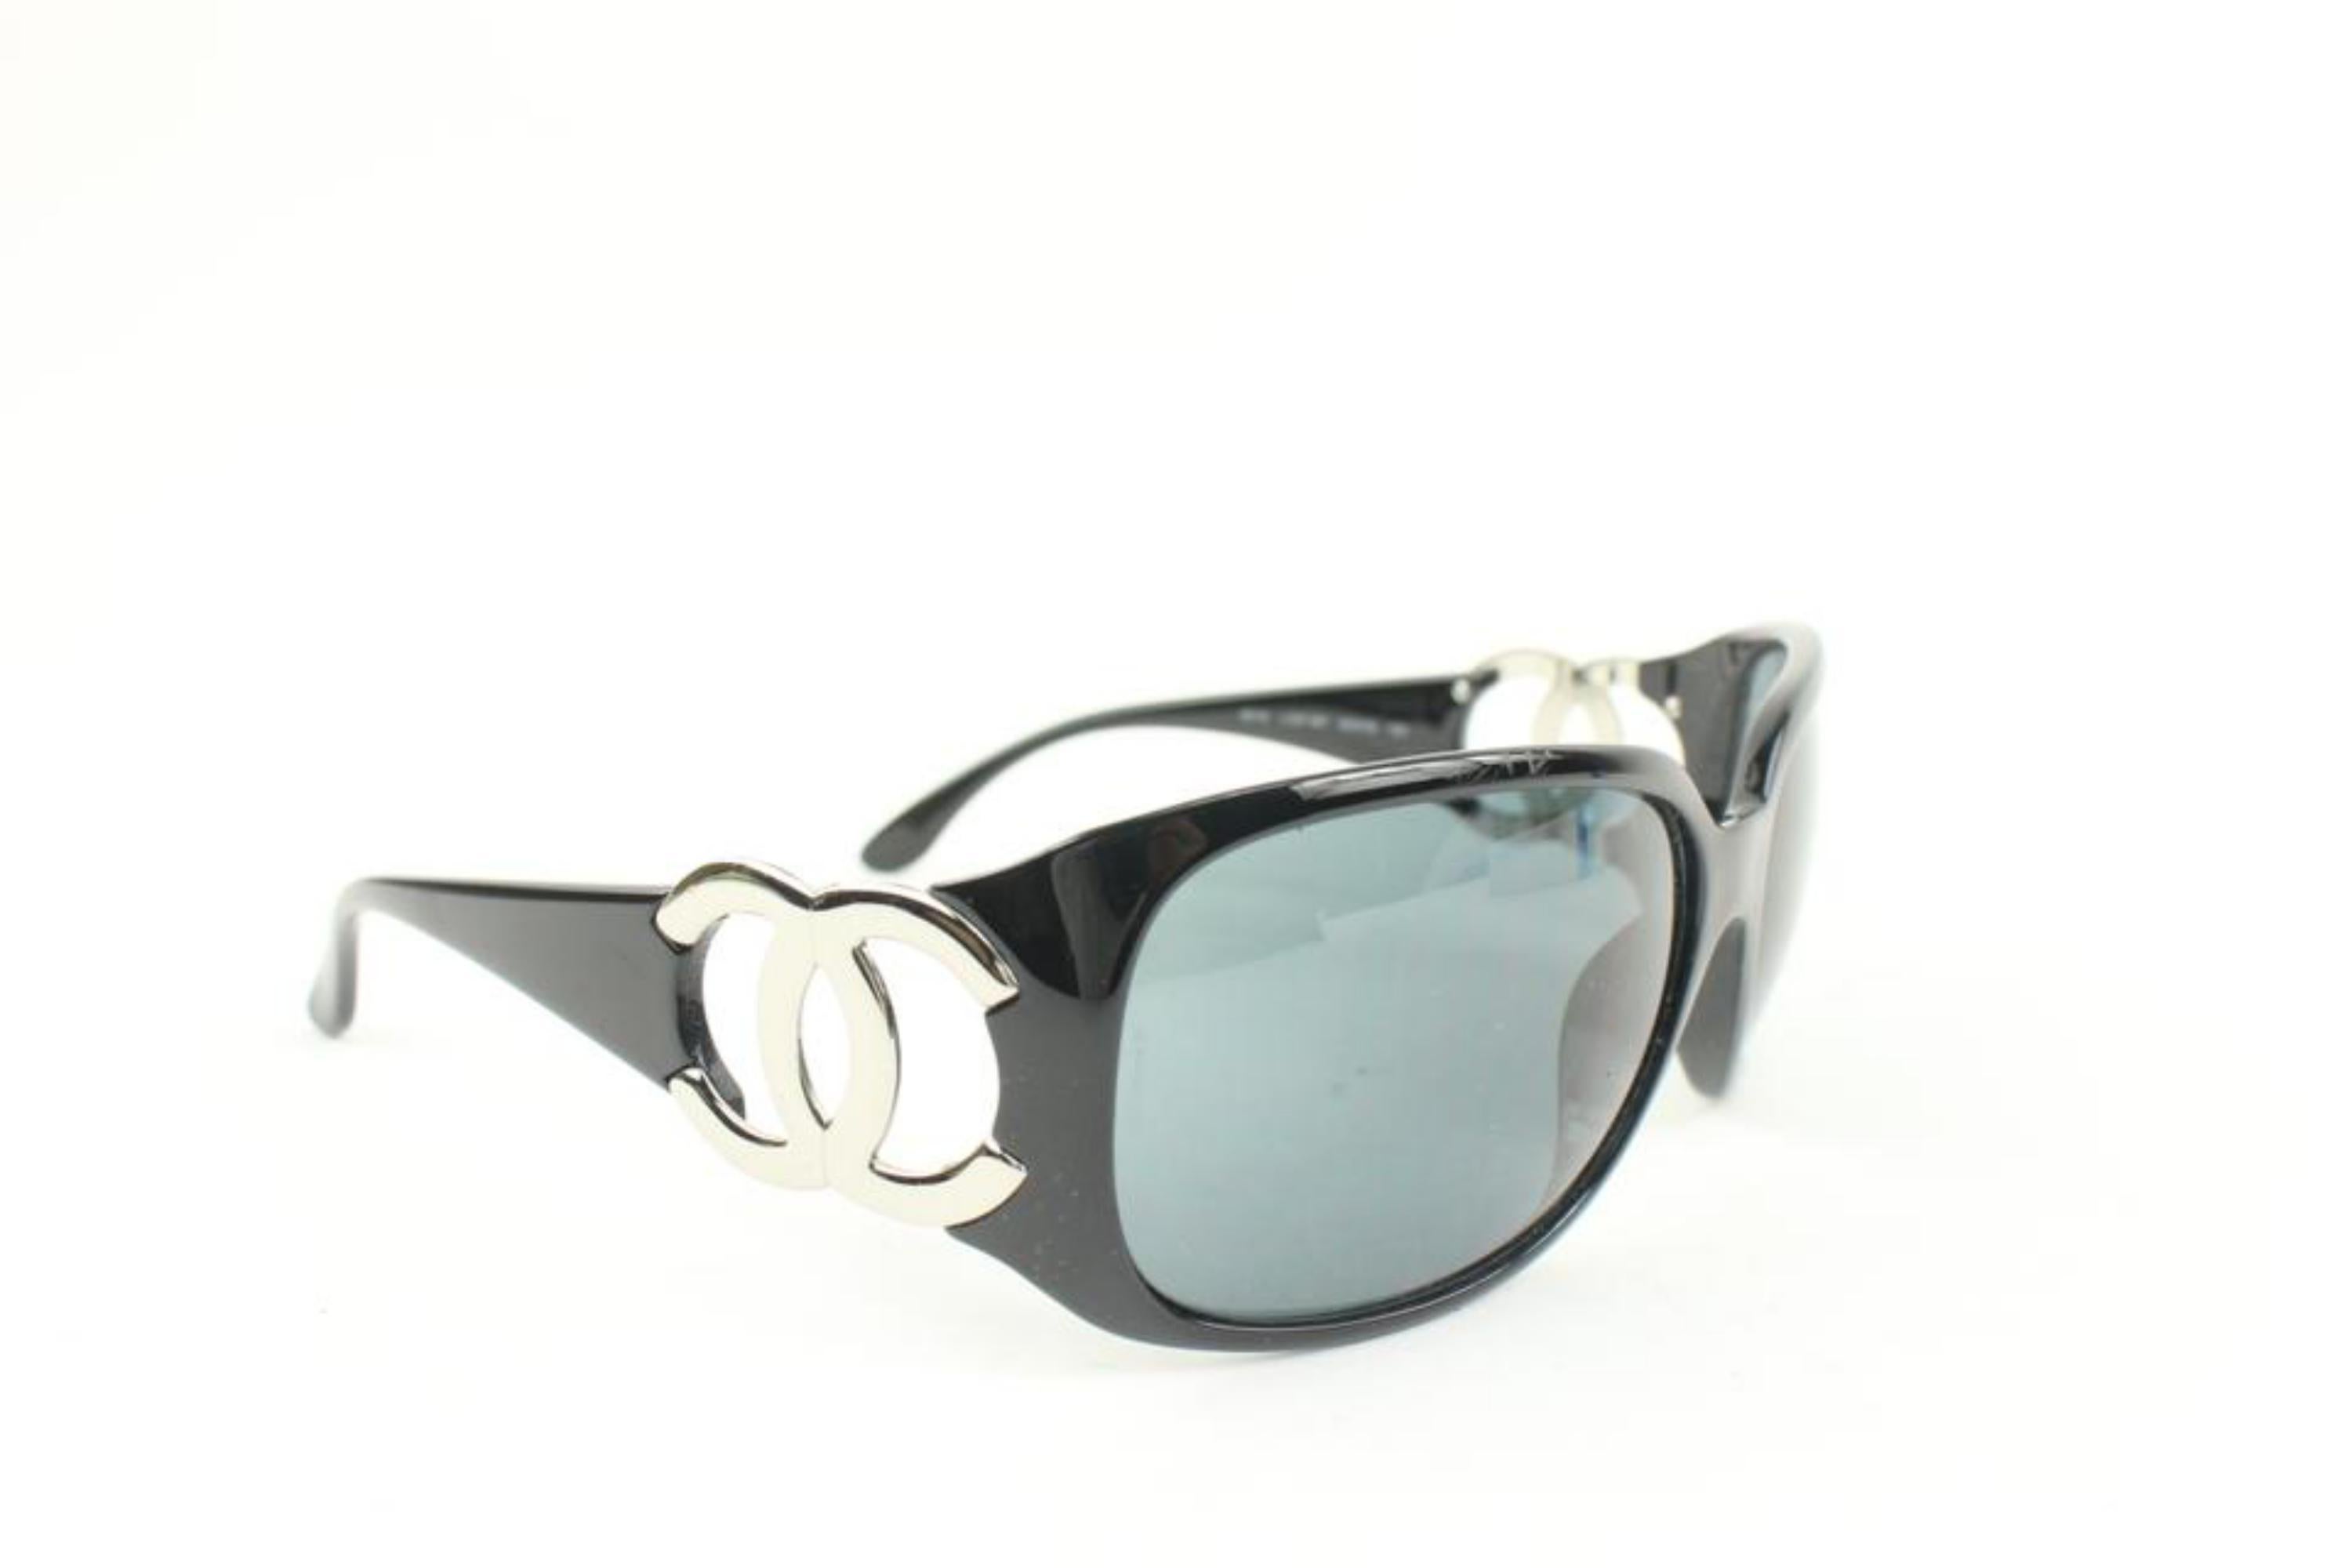 Chanel 6014 CC Jumbo Black Sunglasses 19ck31s
Date Code/Serial Number: 6014 c.501/87 
Made In: Italy
Measurements: Length:  5.75